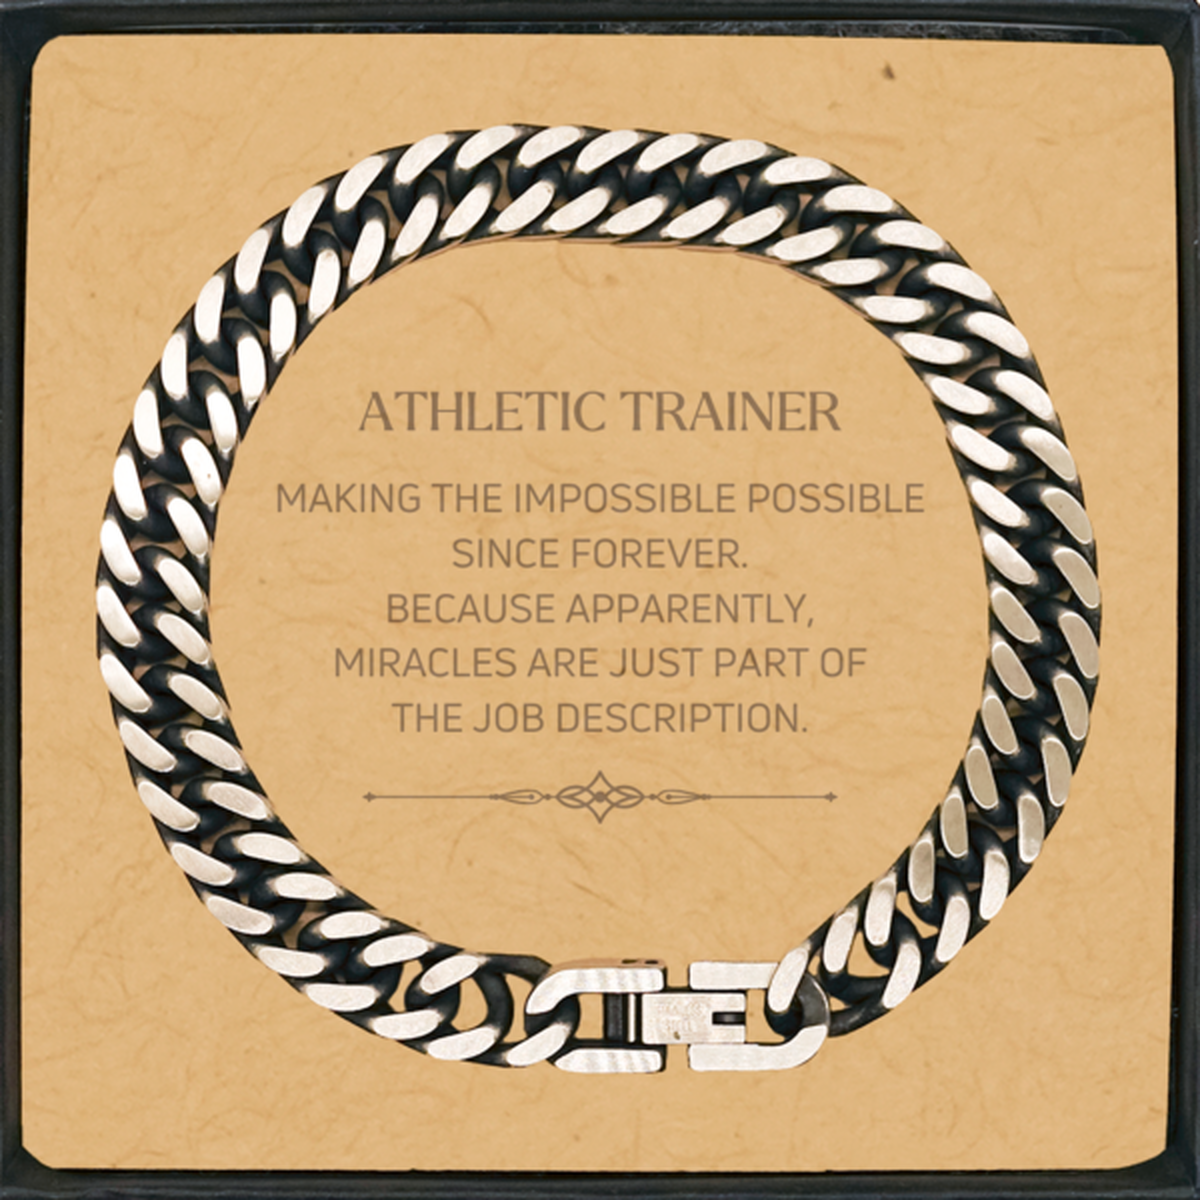 Funny Athletic Trainer Gifts, Miracles are just part of the job description, Inspirational Birthday Cuban Link Chain Bracelet For Athletic Trainer, Men, Women, Coworkers, Friends, Boss